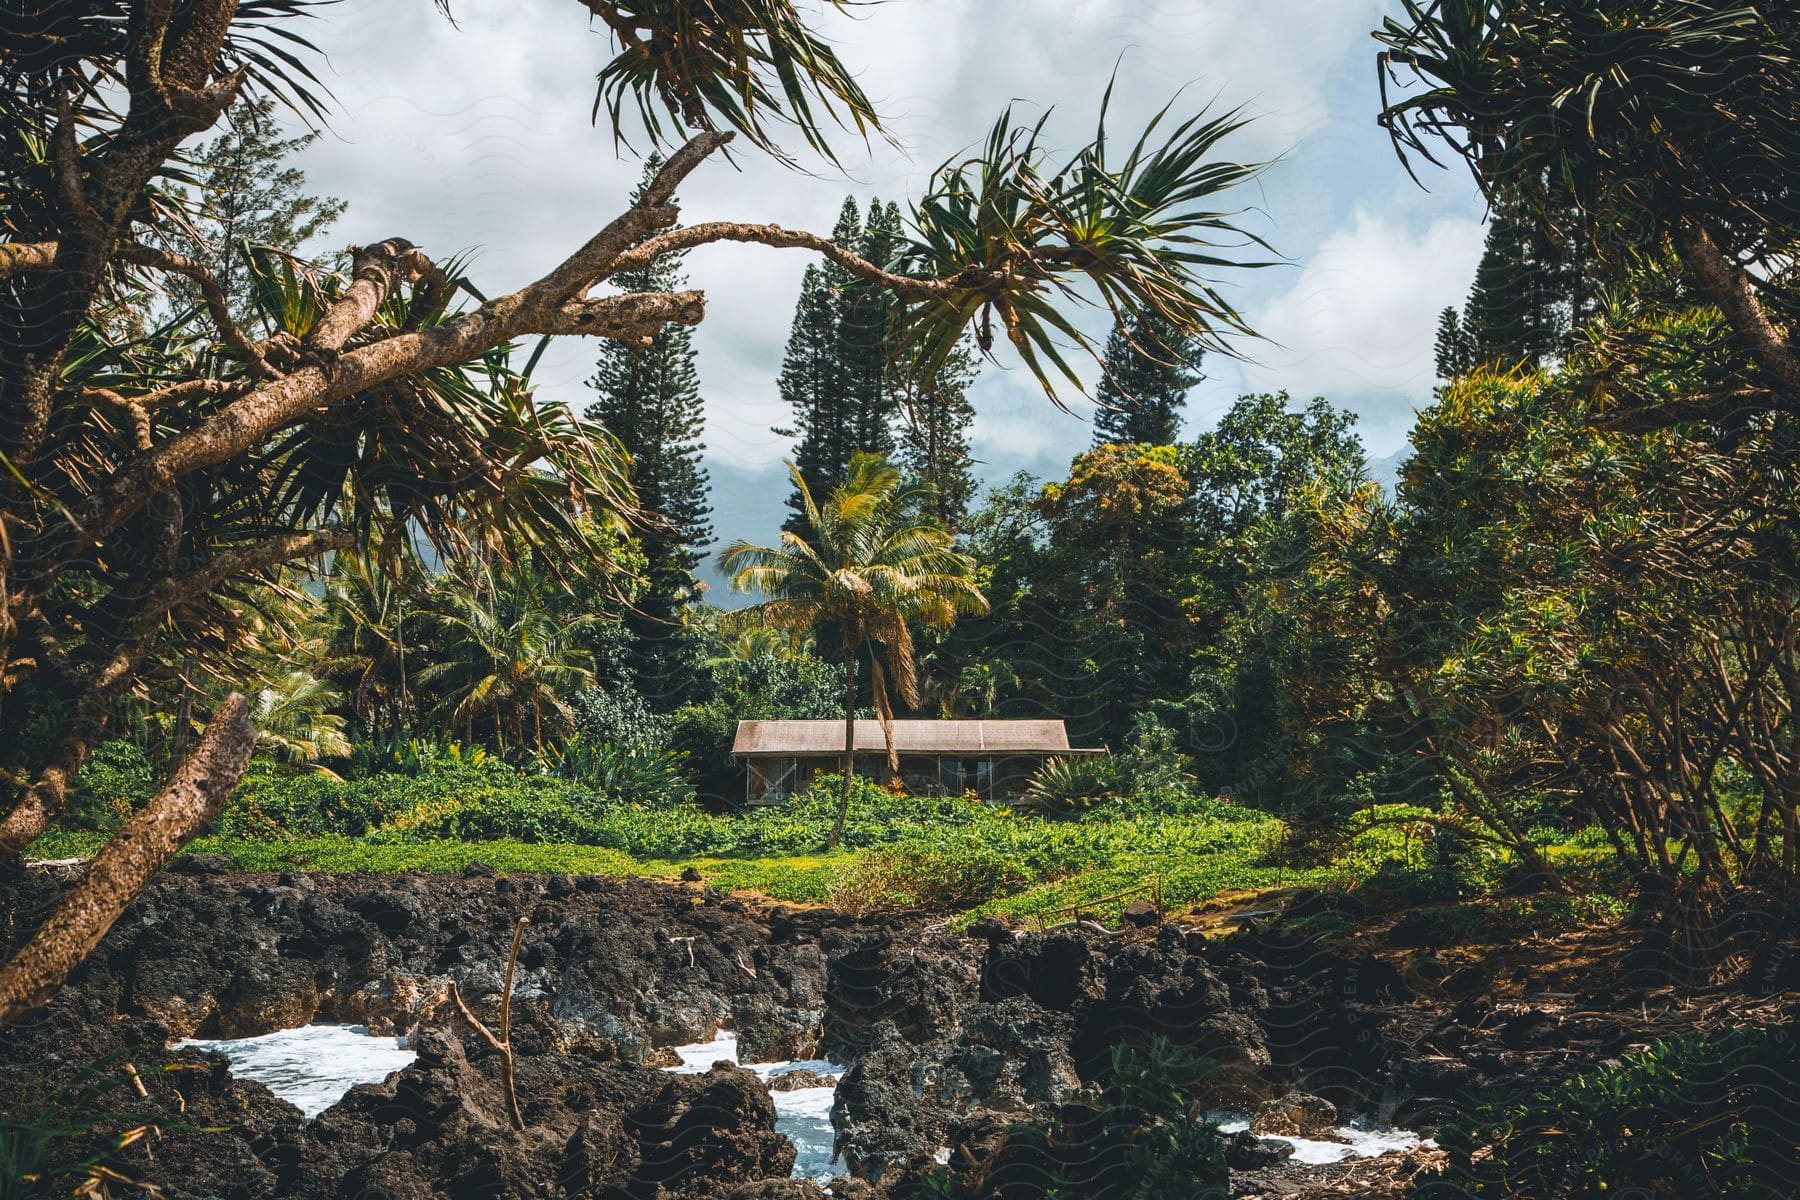 Stock photo of a cabin on the edge of a tropical coast.